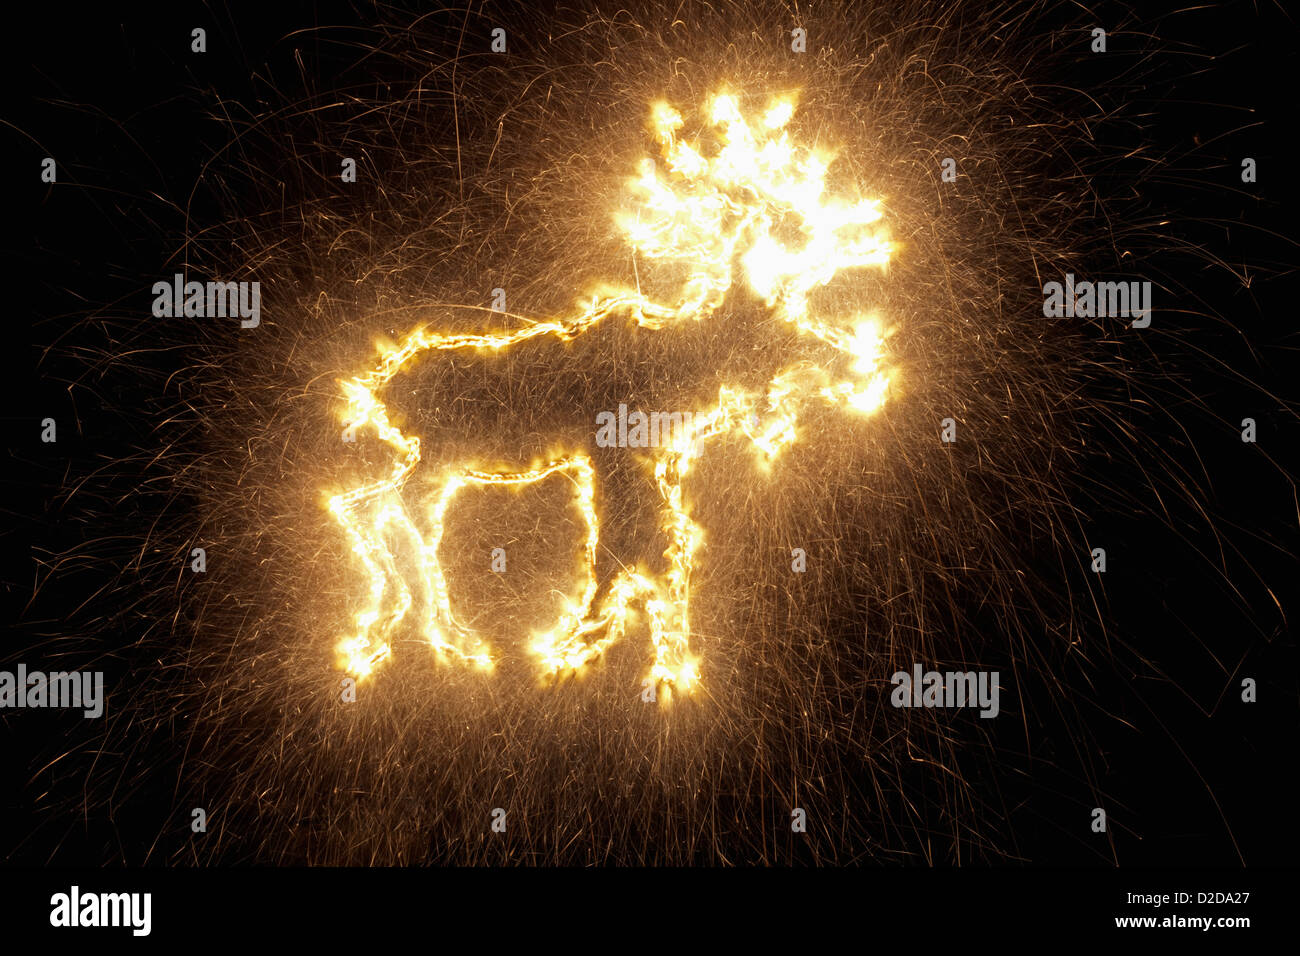 A reindeer drawn on a black background with a sparkler Stock Photo